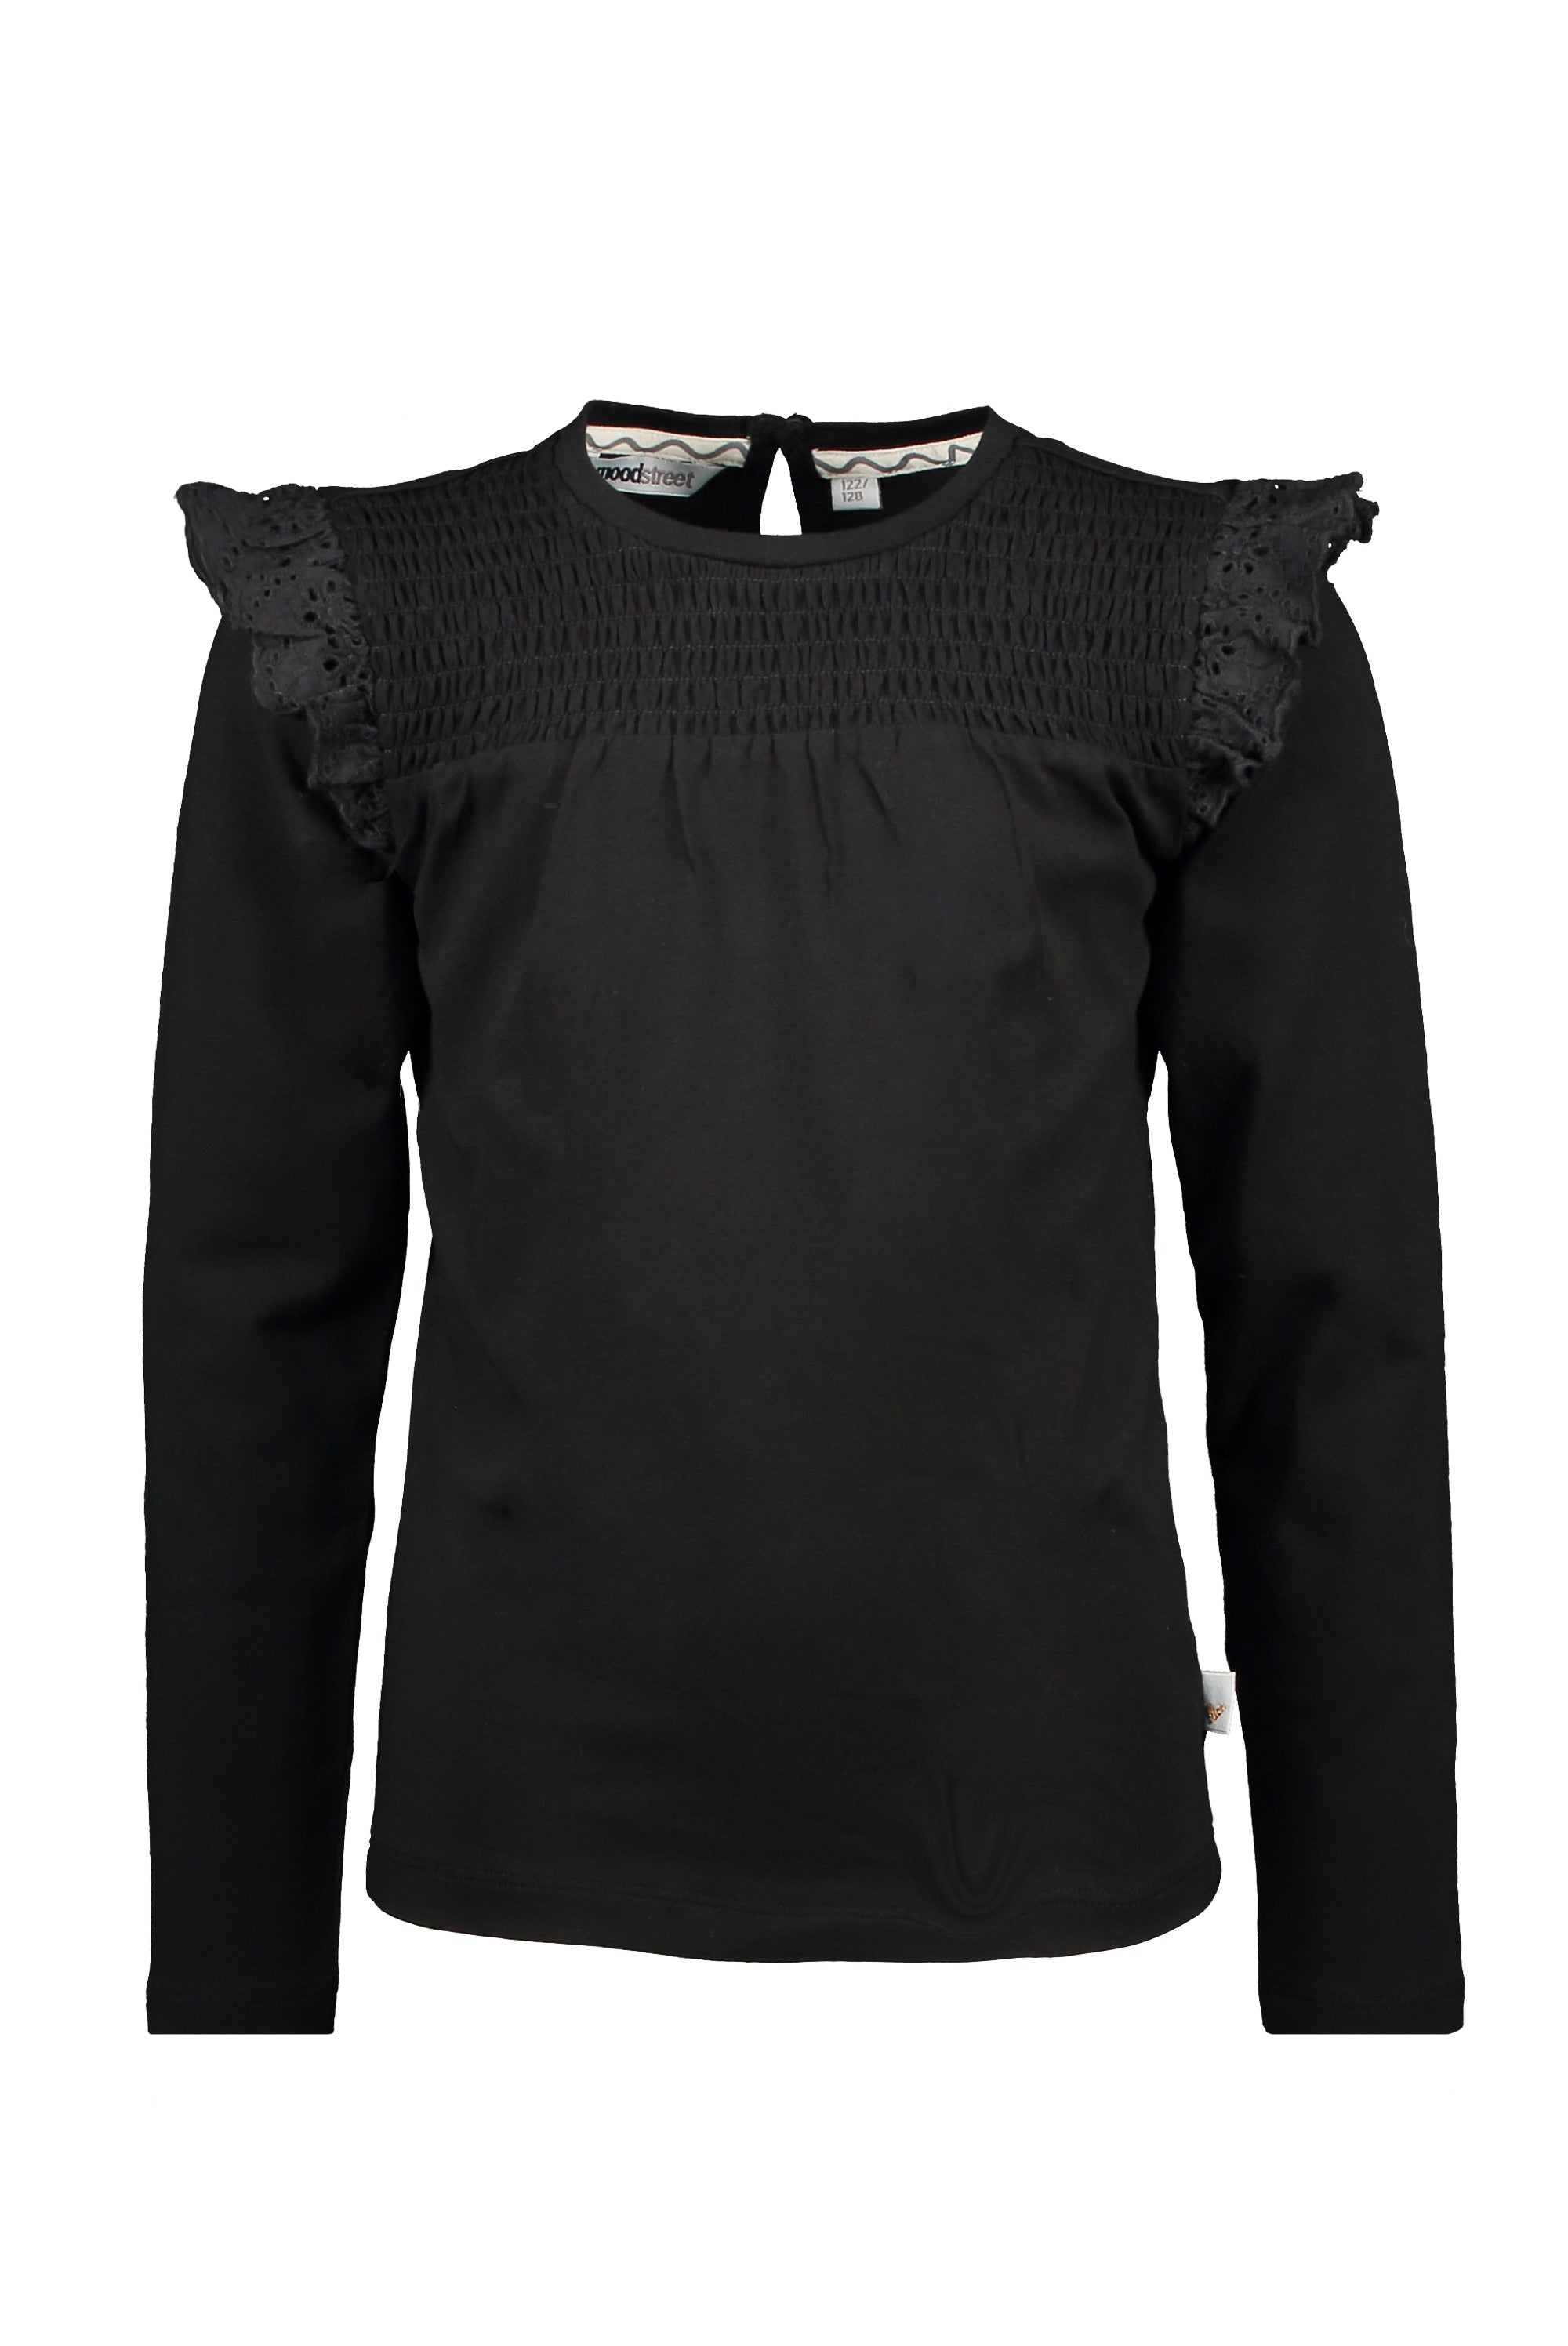 Moodstreet MT top with embroidery contrast